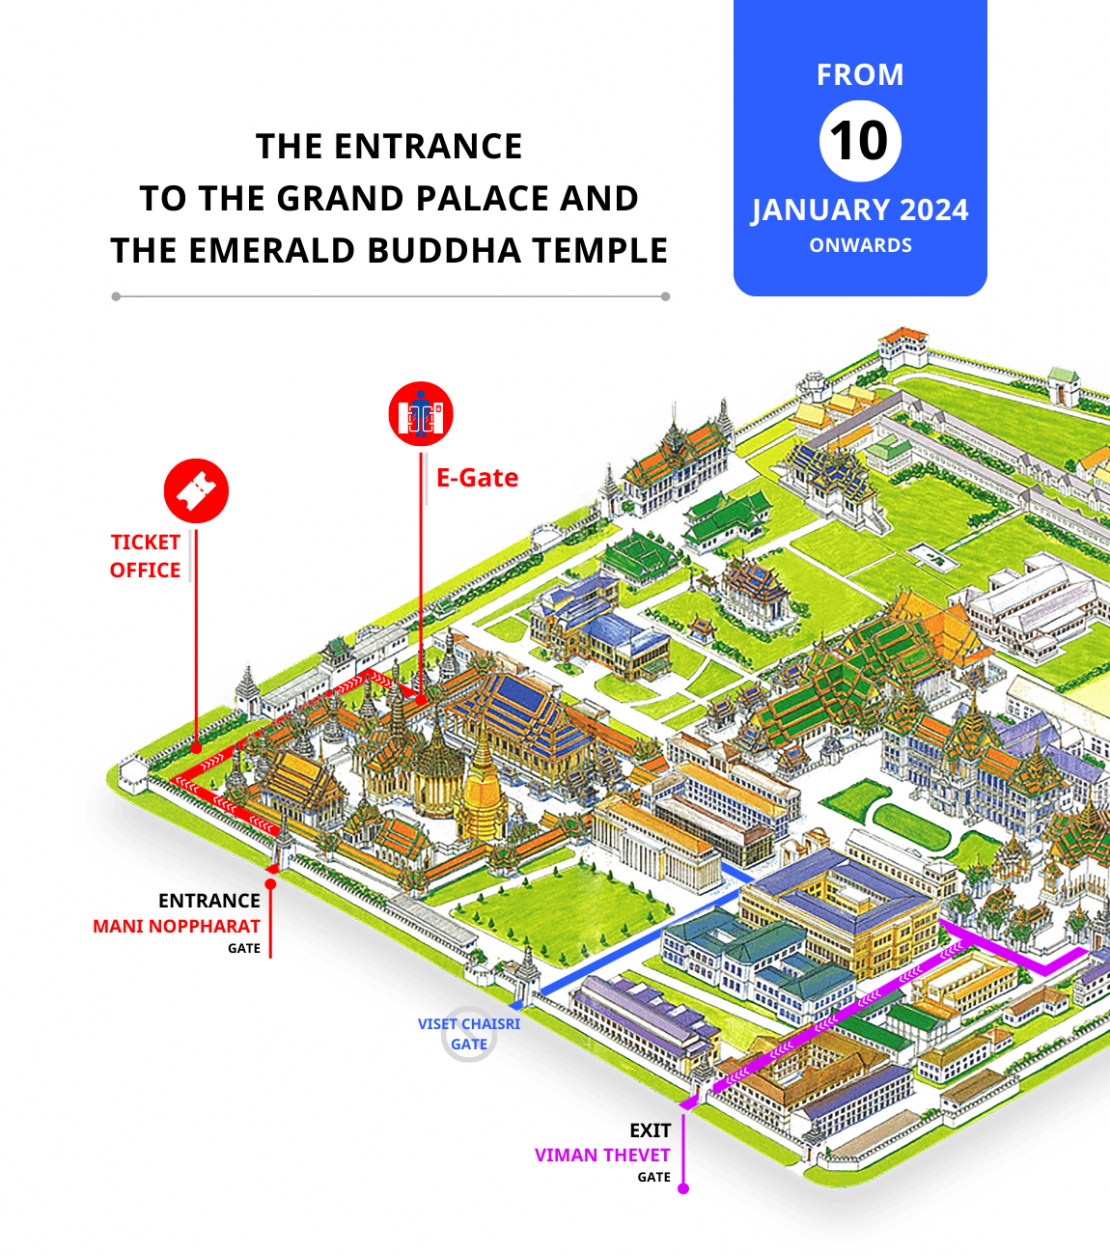 THE BUREAU OF THE ROYAL HOUSEHOLD WOULD LIKE TO ANNOUNCE THE CHANGING OF THE ENTRANCE TO THE GRAND PALACE AND THE EMERALD BUDDHA TEMPLE